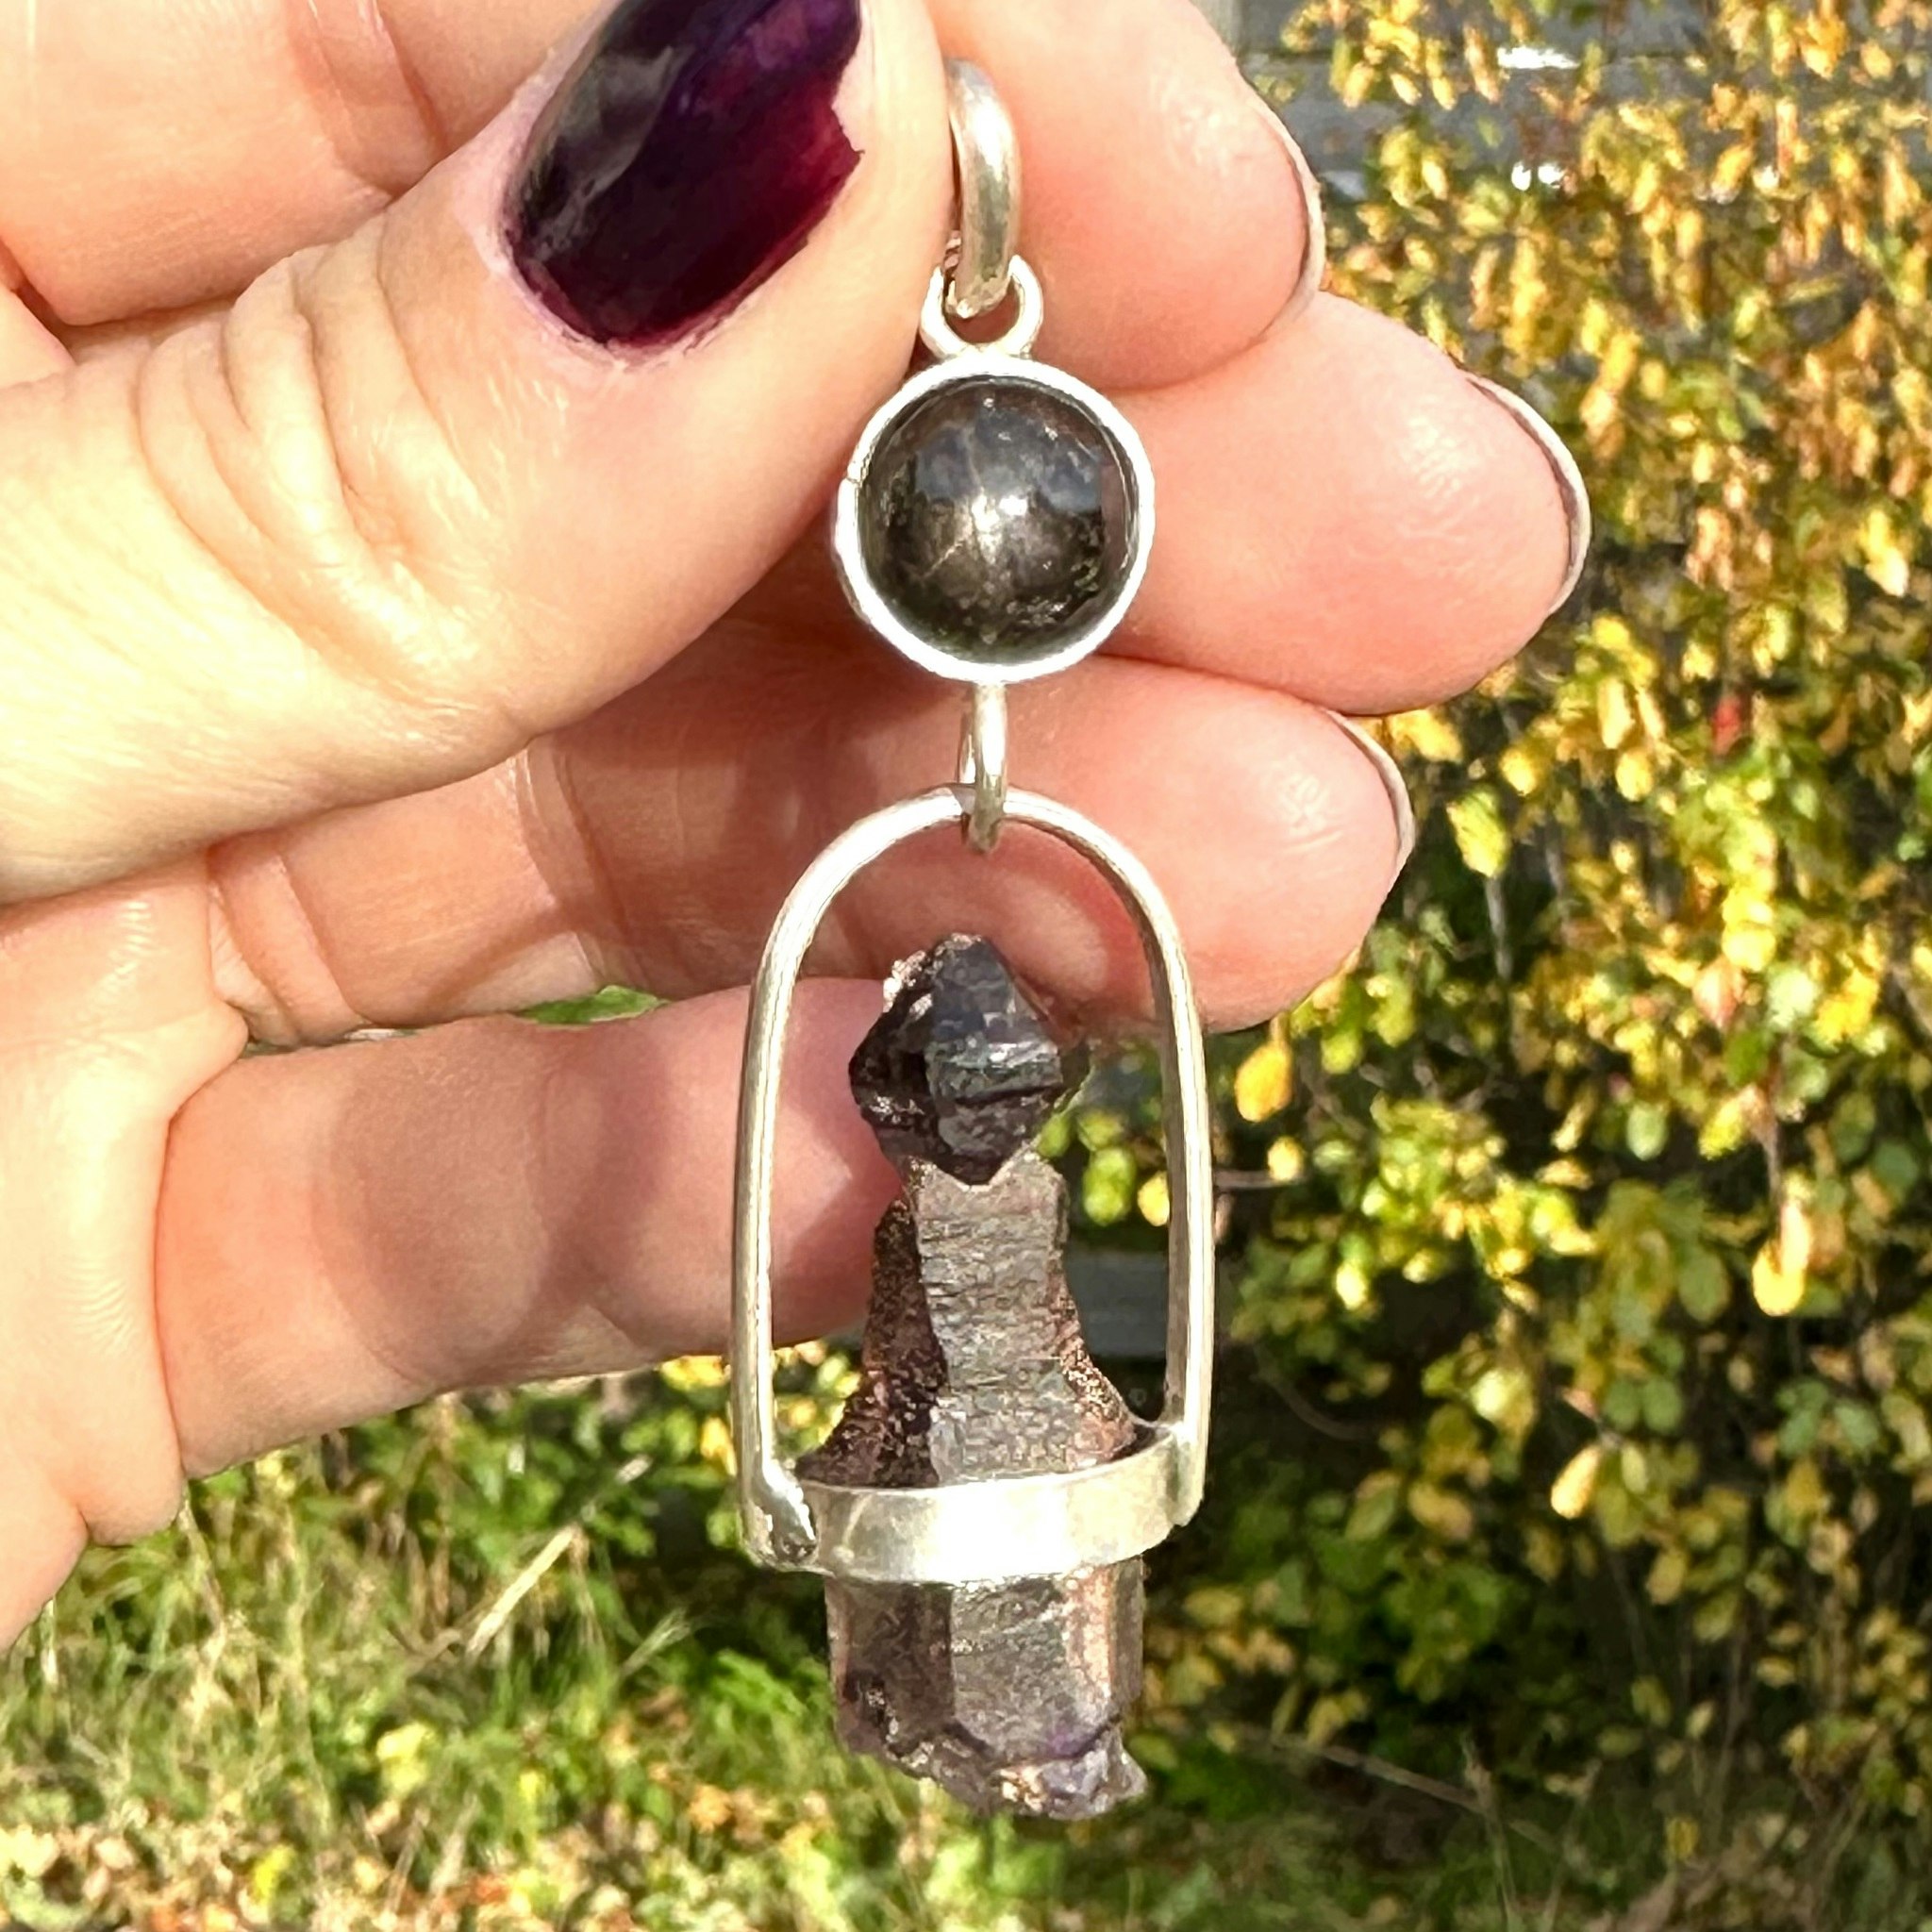 Star sapphire "black star" with Scepter crystal from Brandenberg